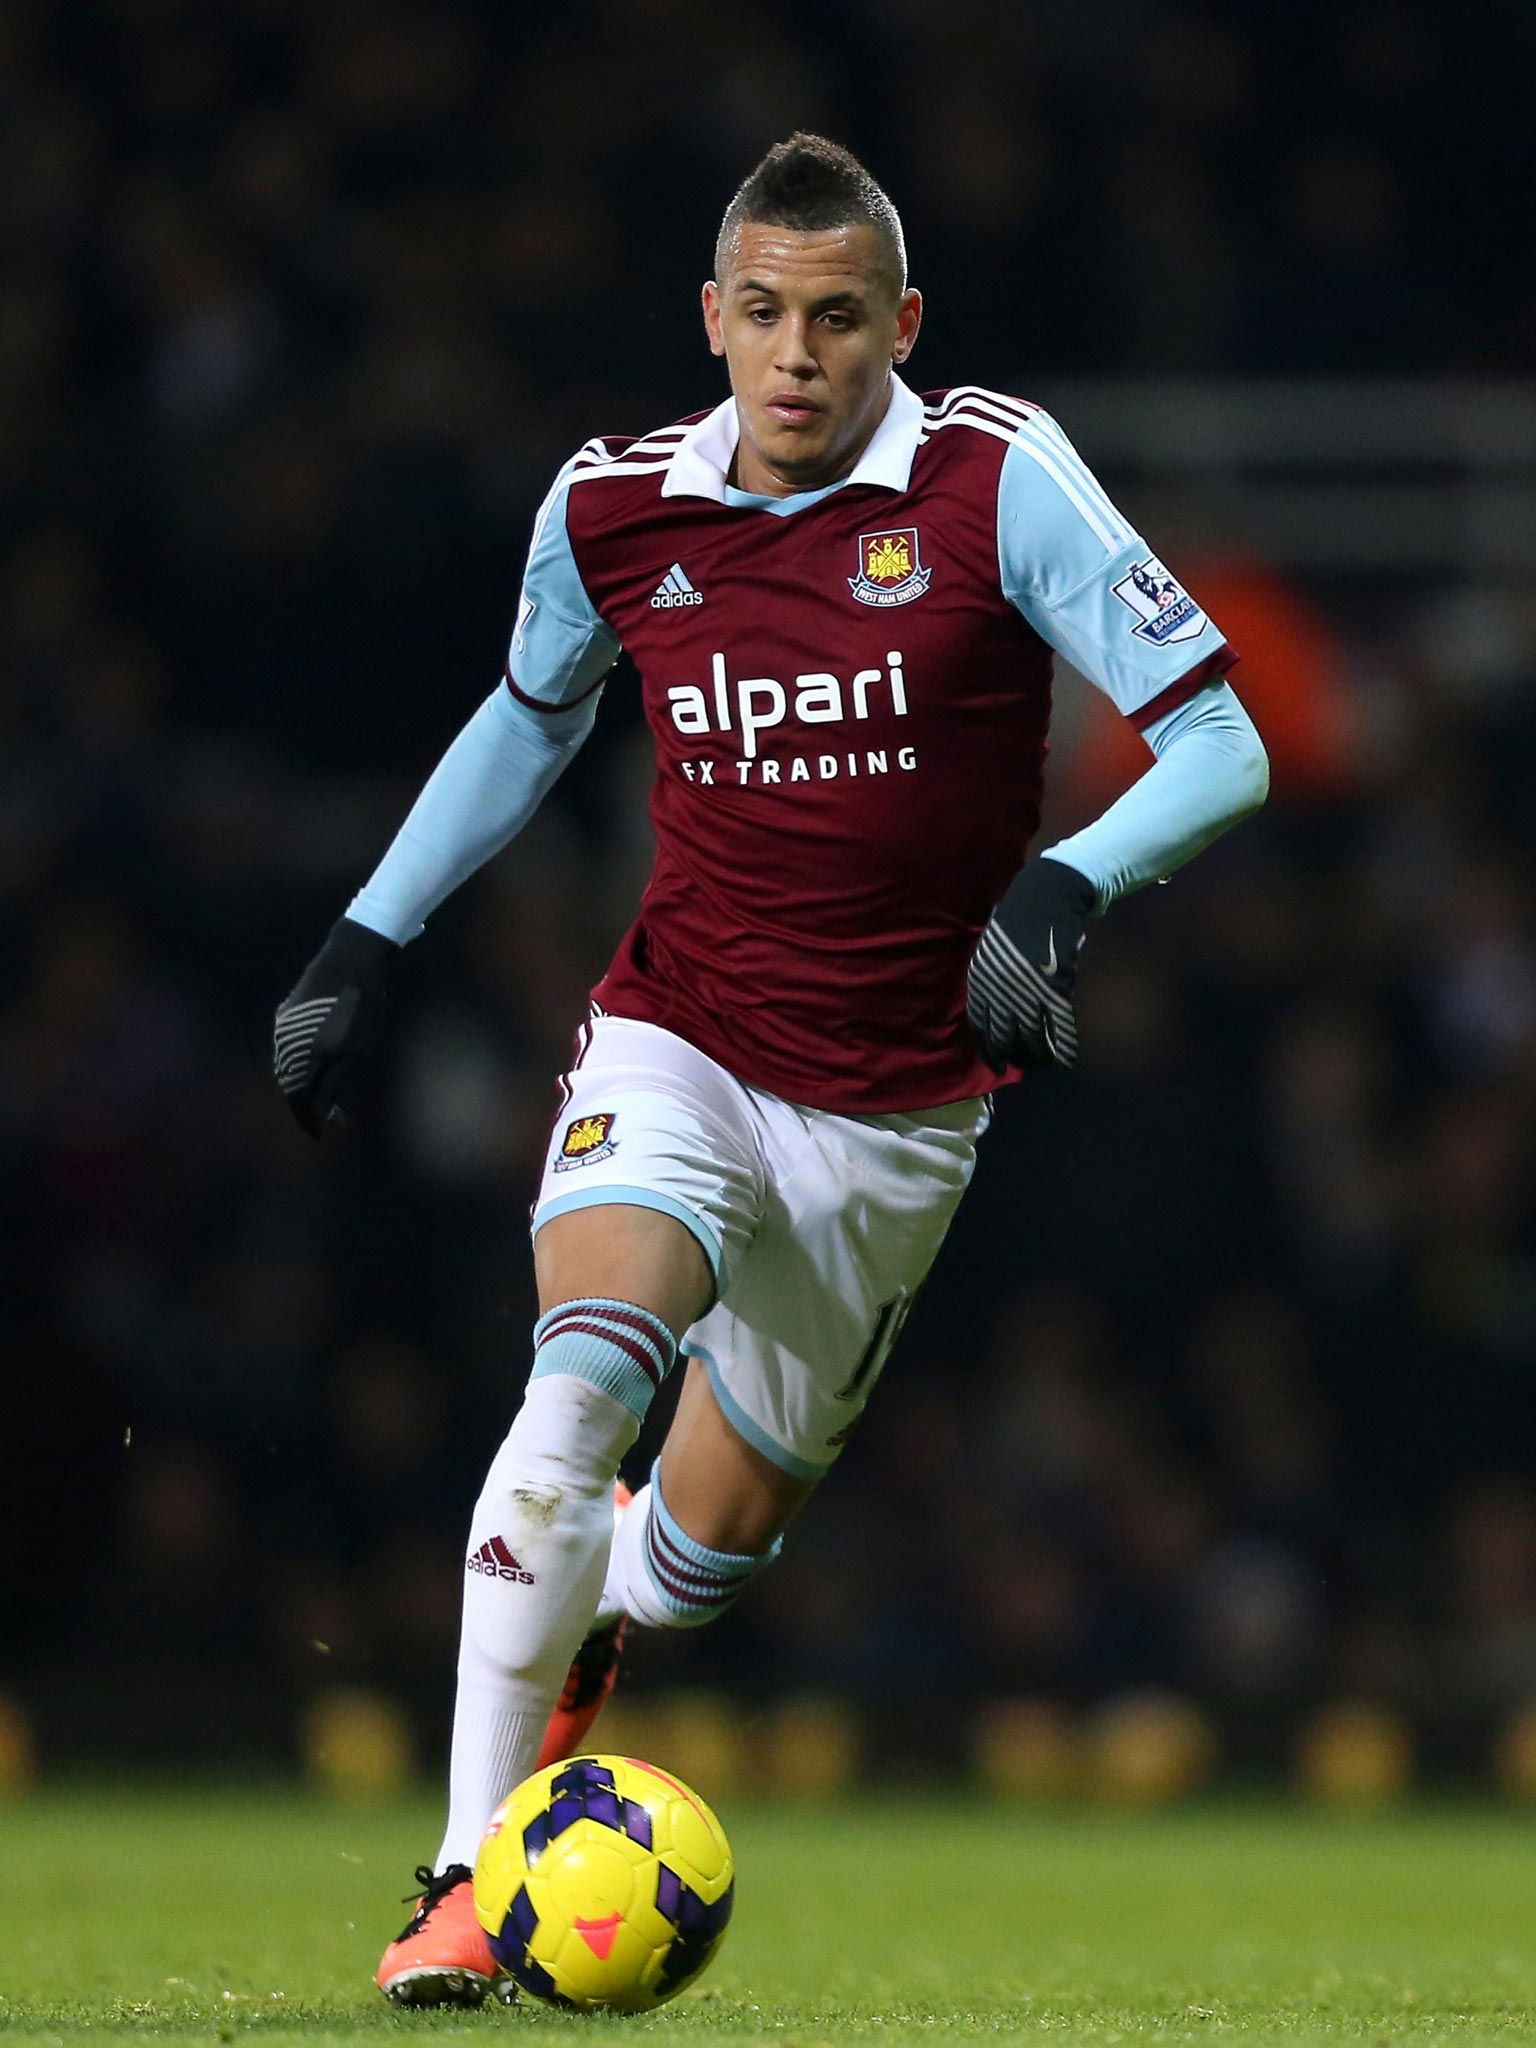 Ravel Morrison has been told he must get back and train by Sam Allardyce